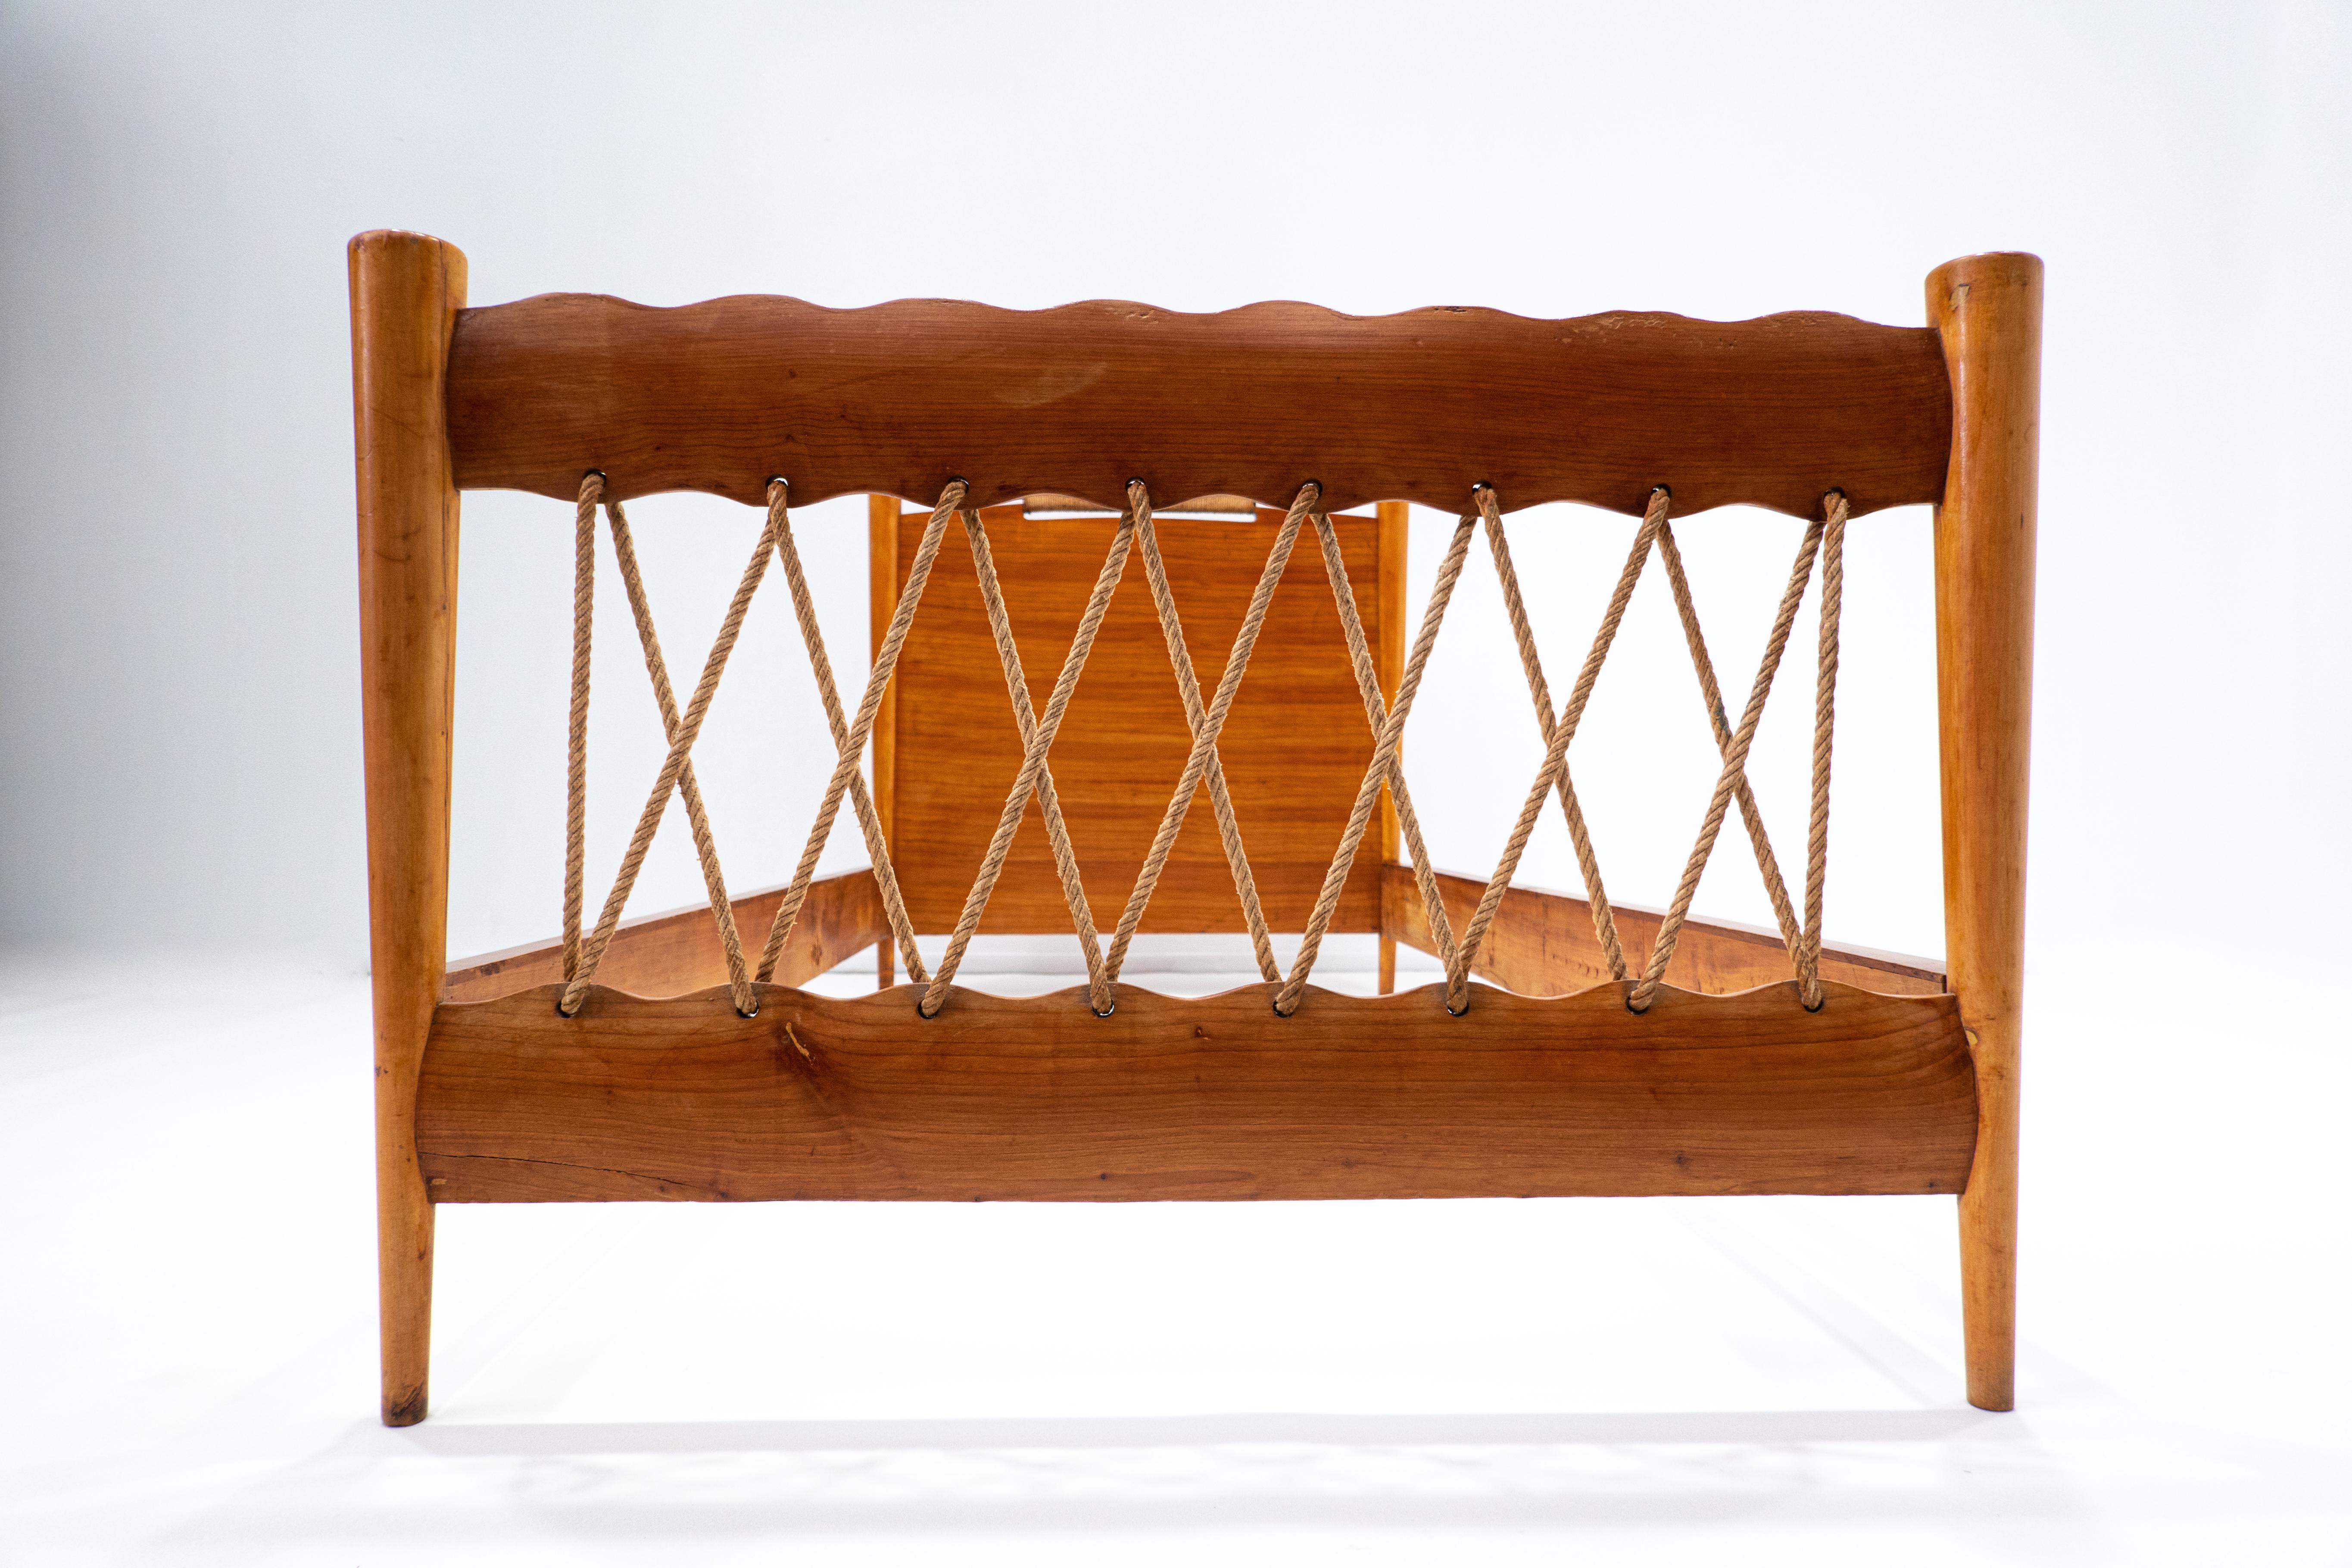 Pair of Beds Attributed to Guglielmo Pecorini, Cherry Wood, Italy, 1940s For Sale 6